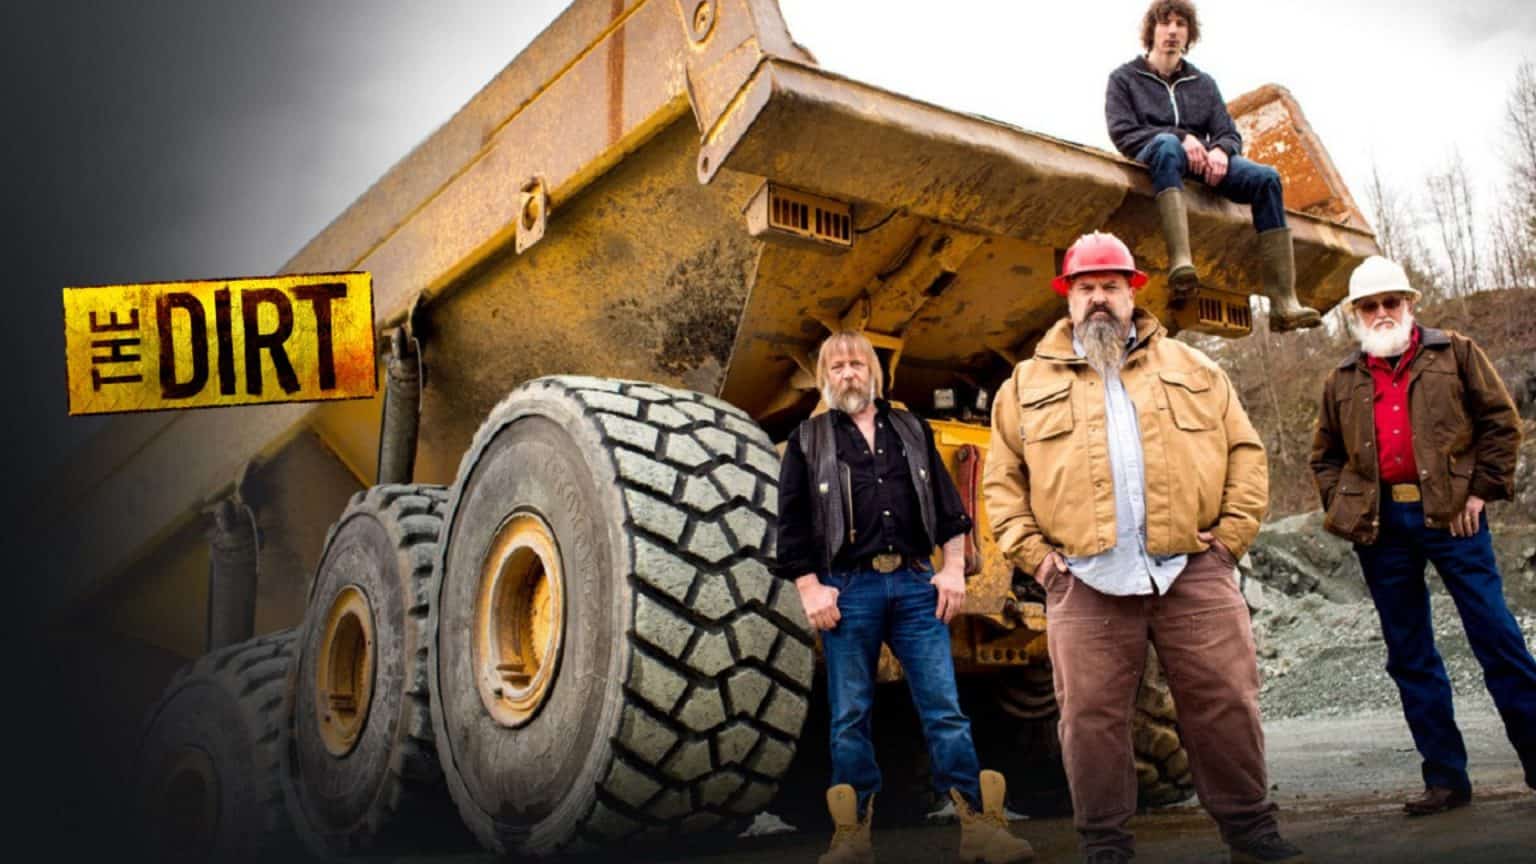 Gold Rush The Dirt Episode 2 Release Date, Spoilers & Streaming Guide